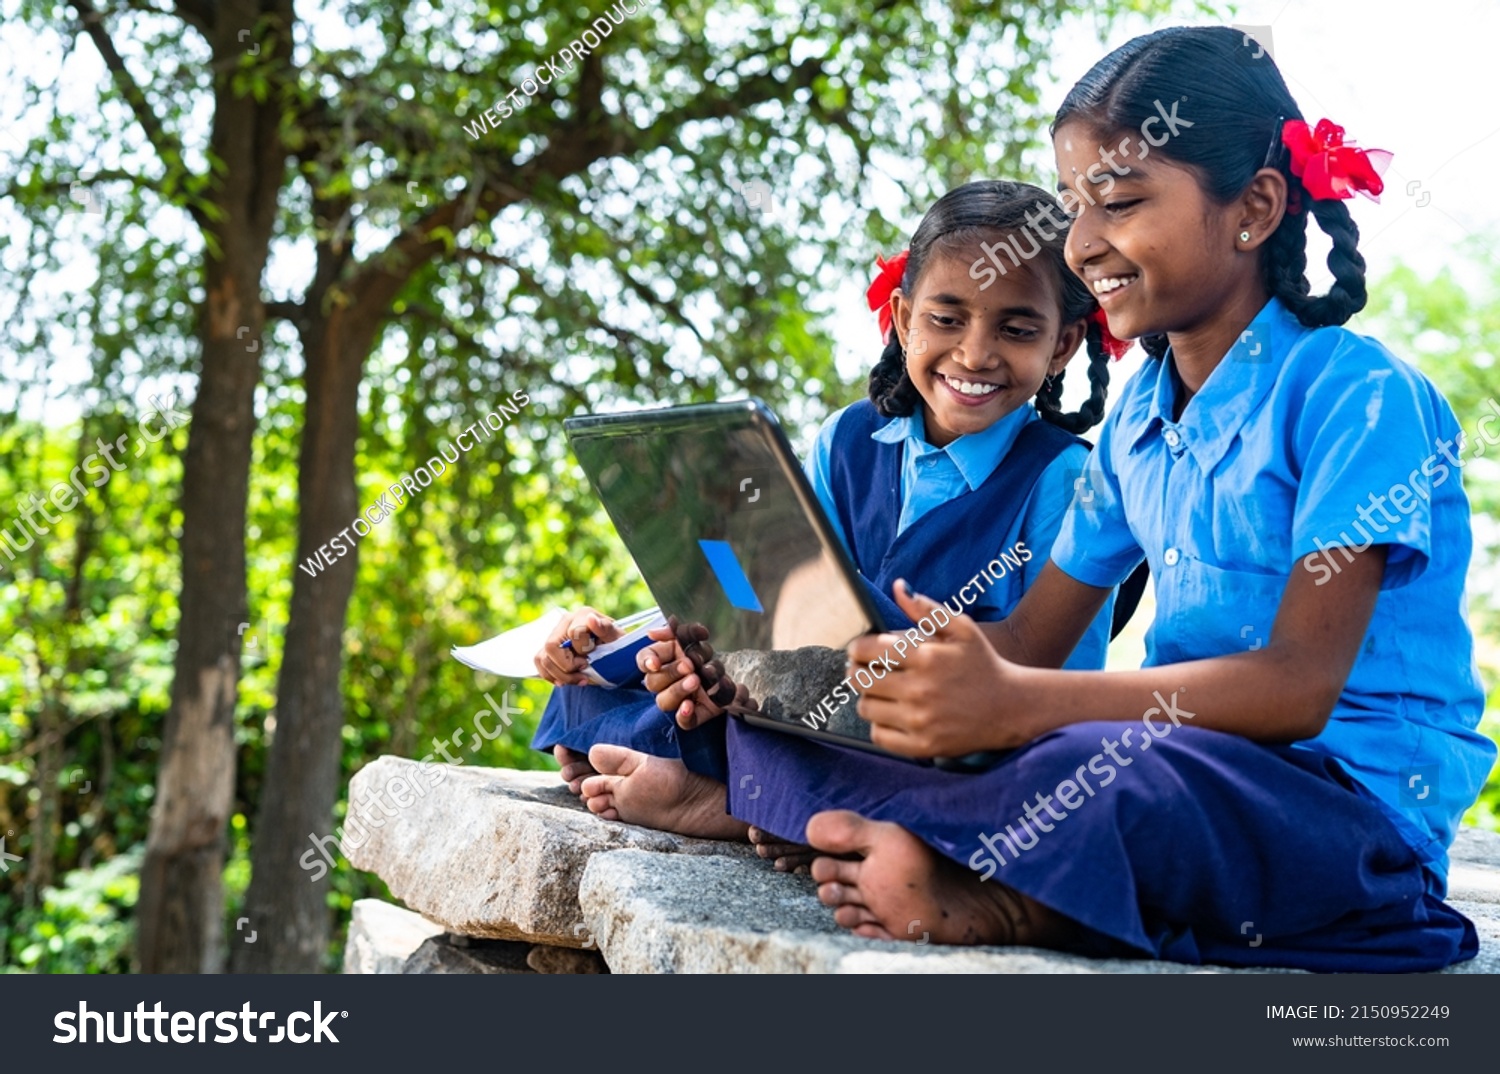 handheld shot of Village school girl kids seriously busy working on laptop - concept of education, technology and knowledge #2150952249